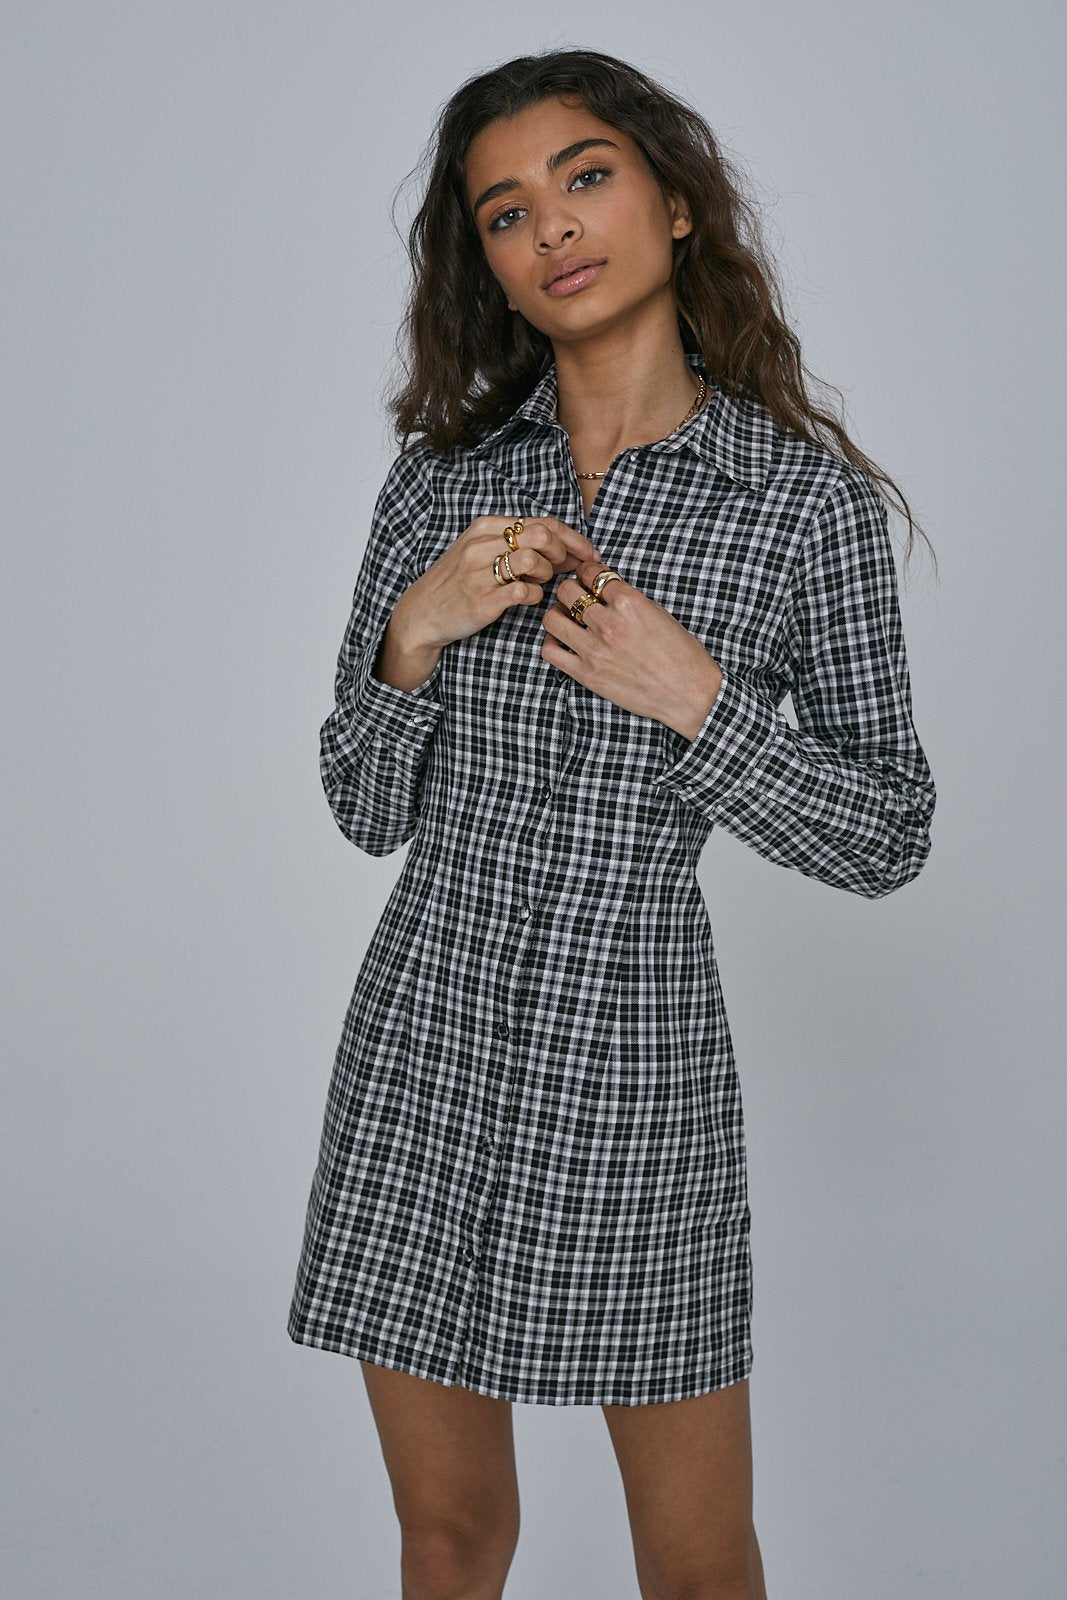 THRIVE DRESS - EXCLUSIVE Dresses from MILK.IT - Just €39! SHOP NOW AT IAMINHATELOVE BOTH IN STORE FOR CYPRUS AND ONLINE WORLDWIDE @ IAMINHATELOVE.COM